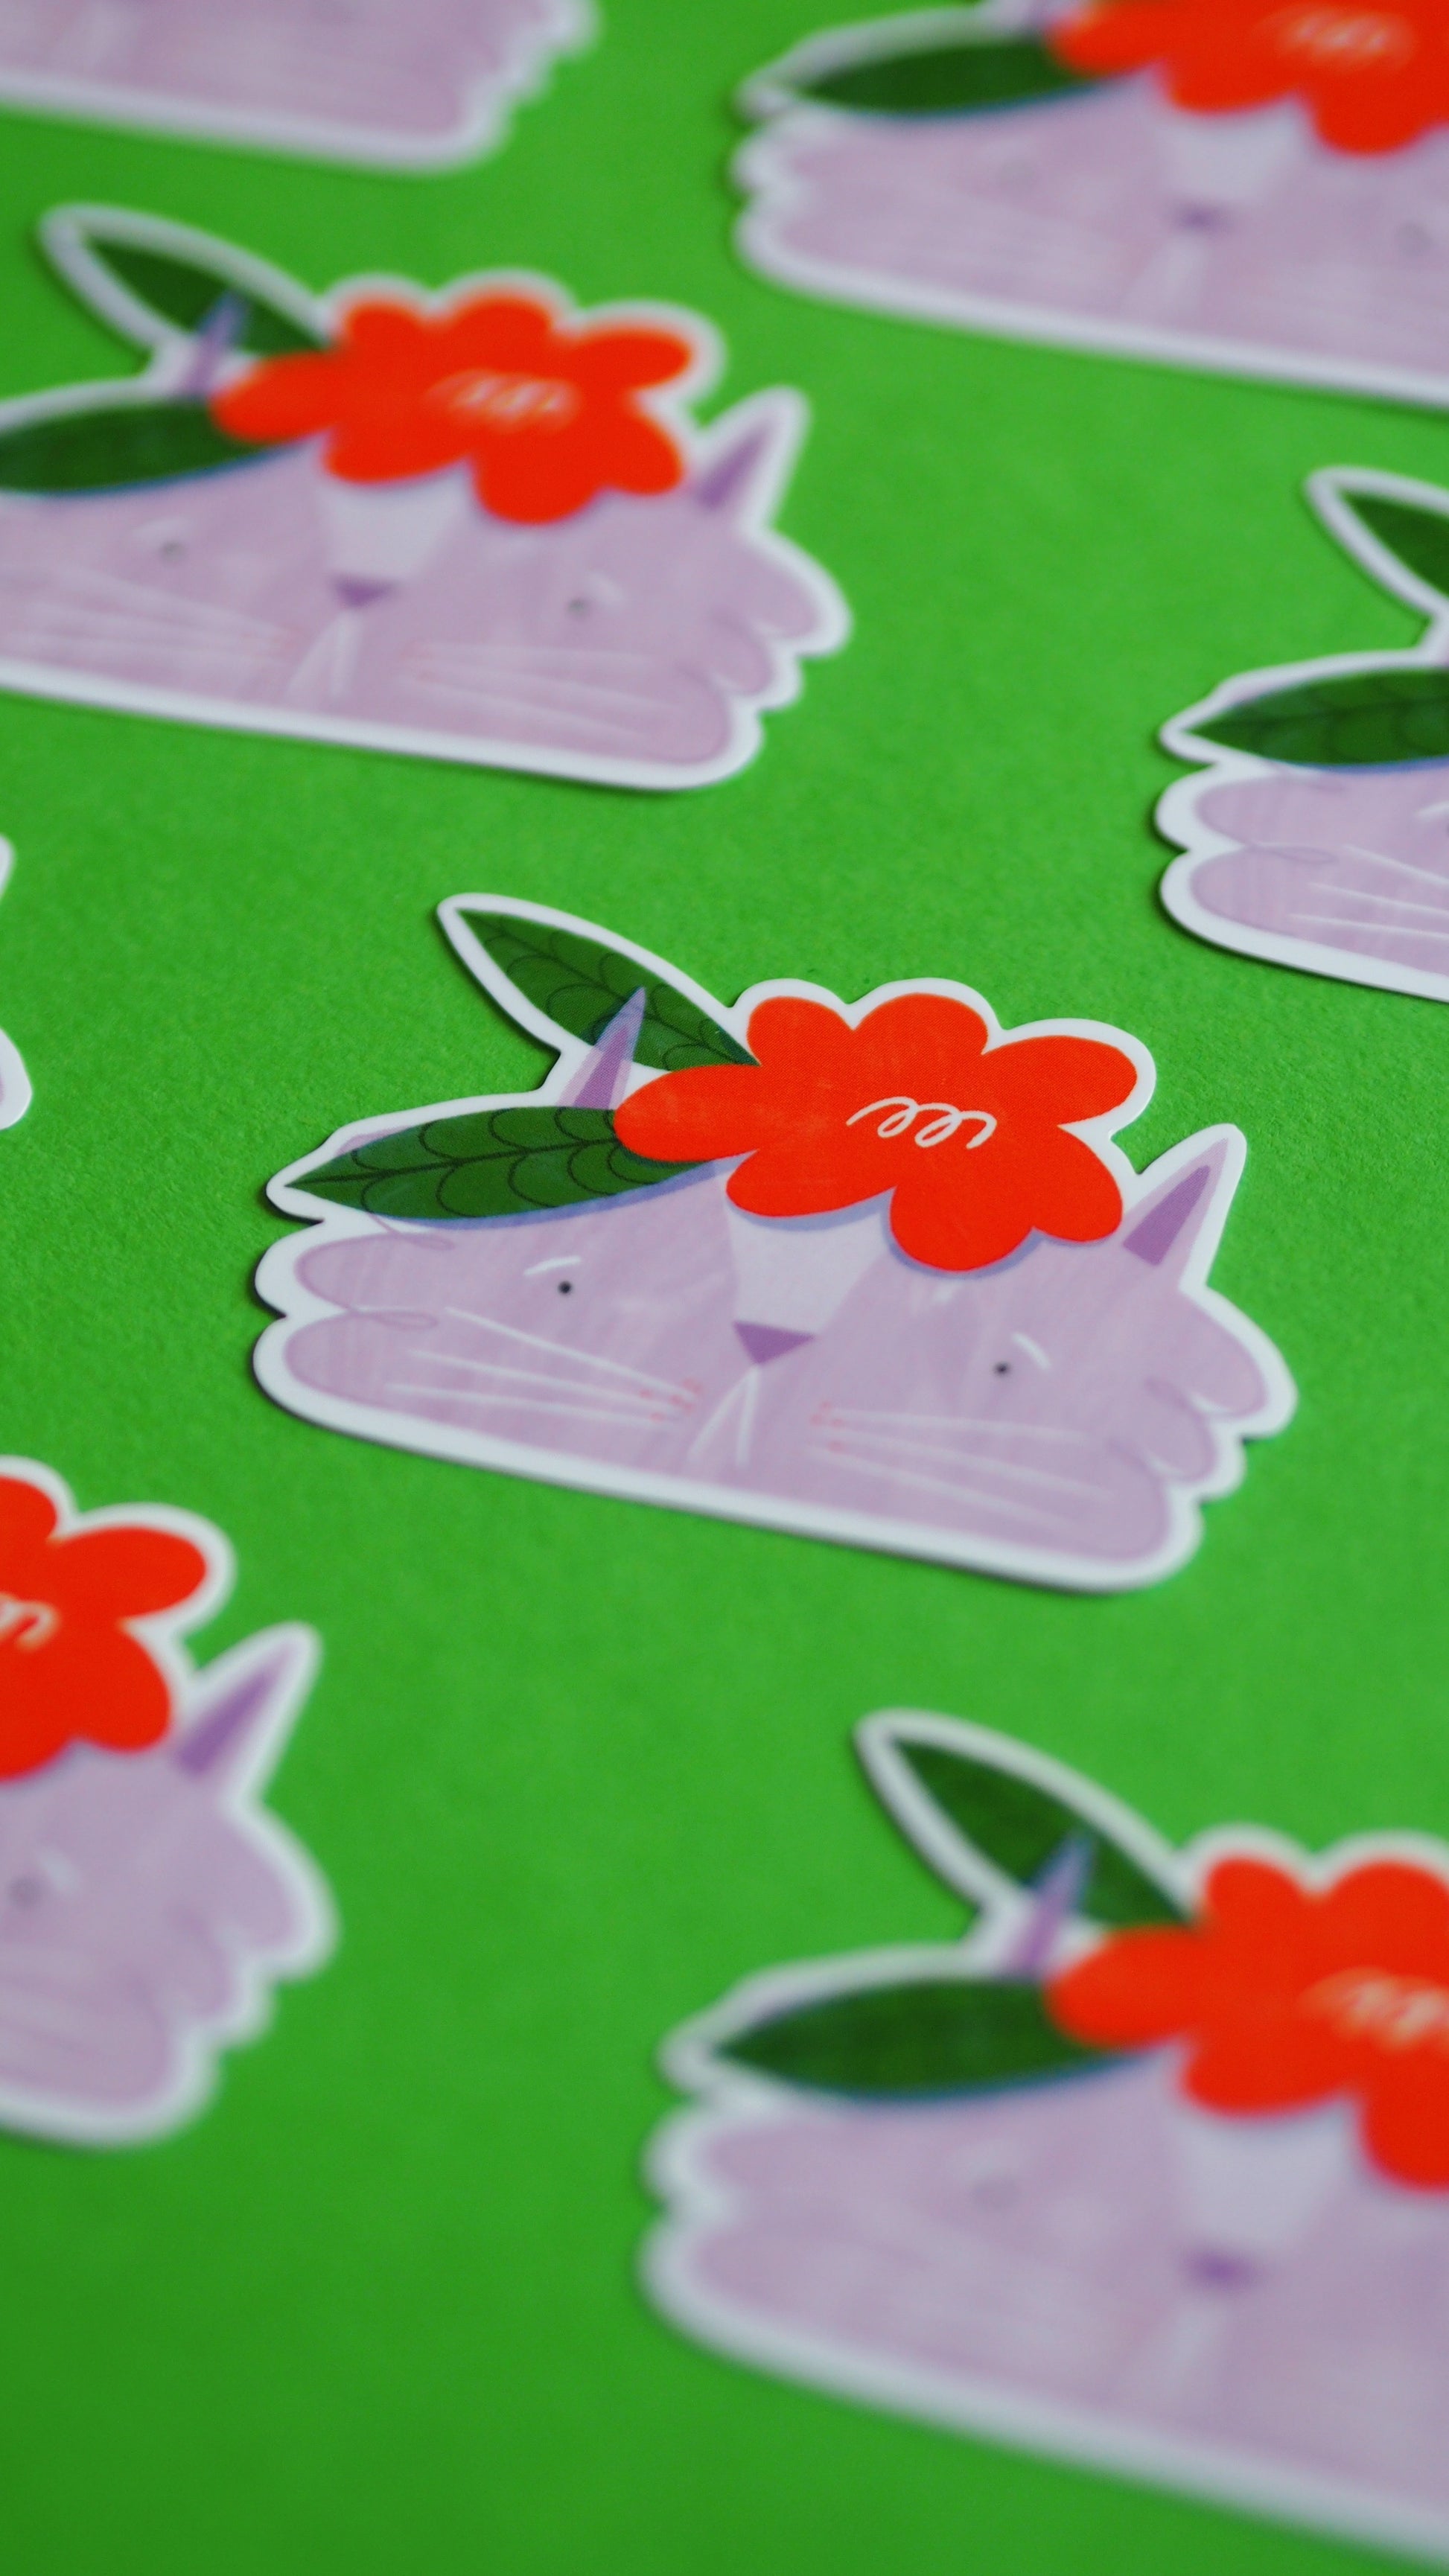 Lilac cat vinyl sticker with big red flower on head with two green leaves coming out of the side